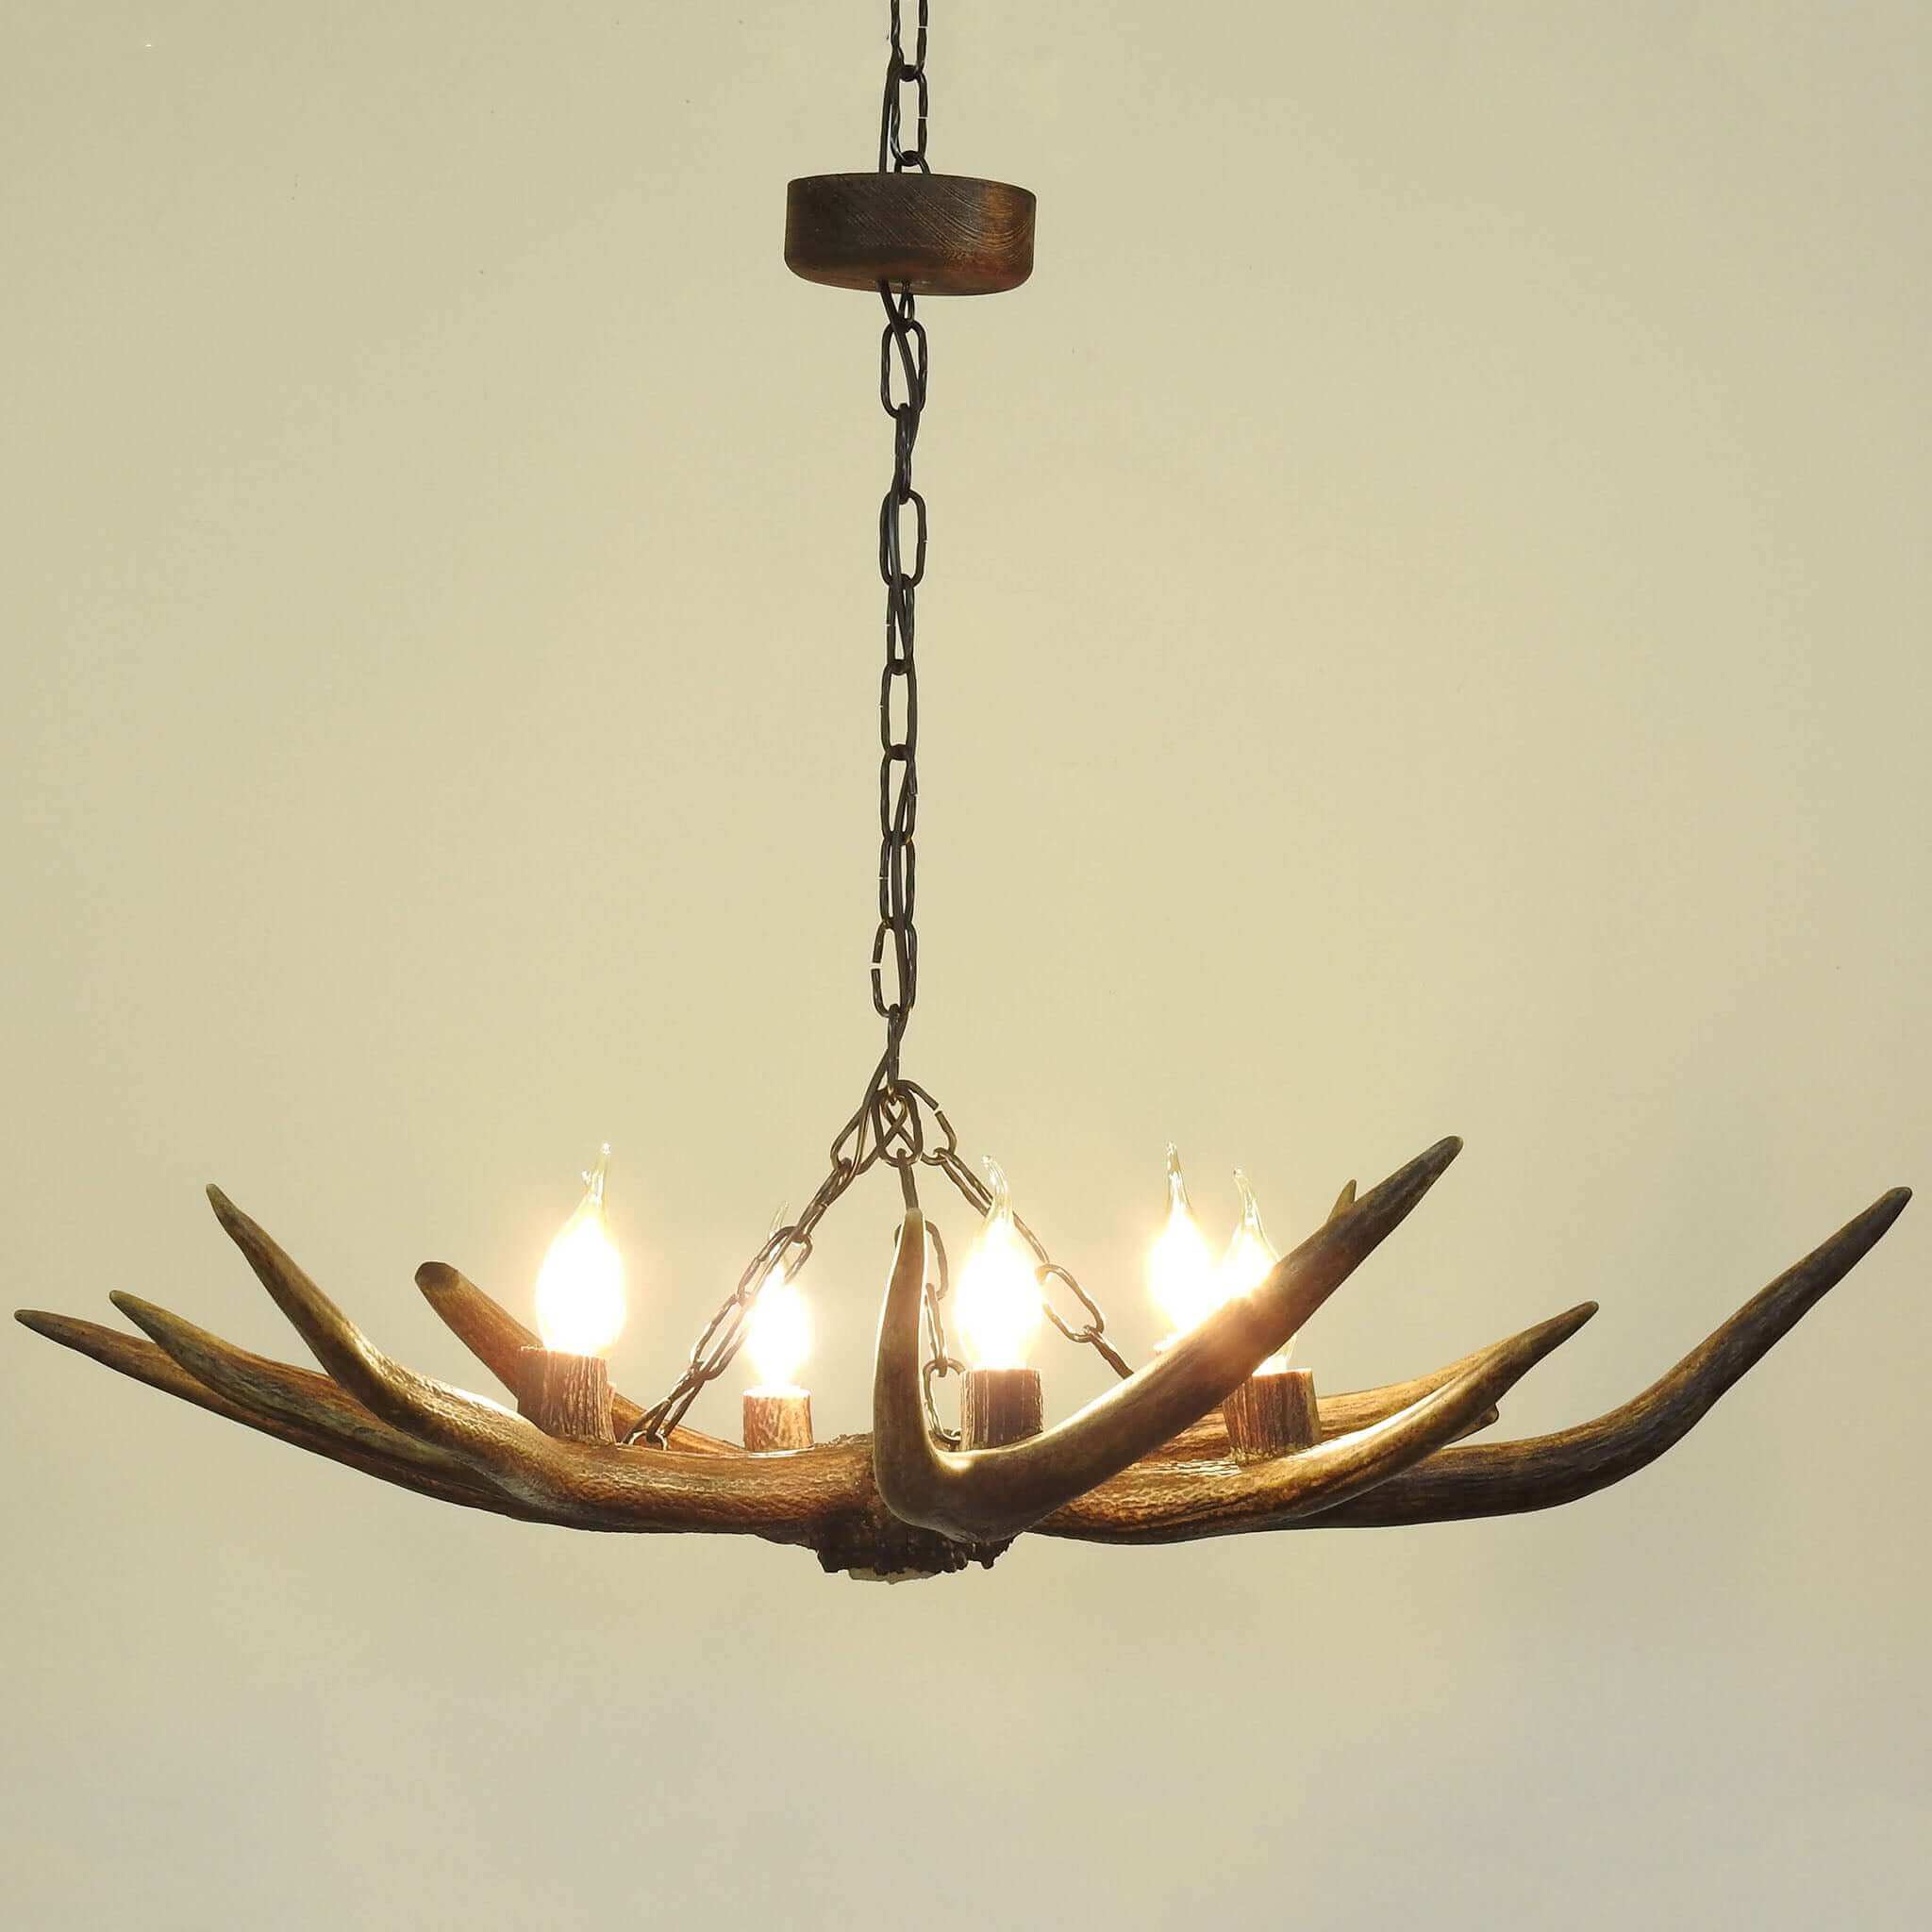 Real antler chandelier hanging on chain.